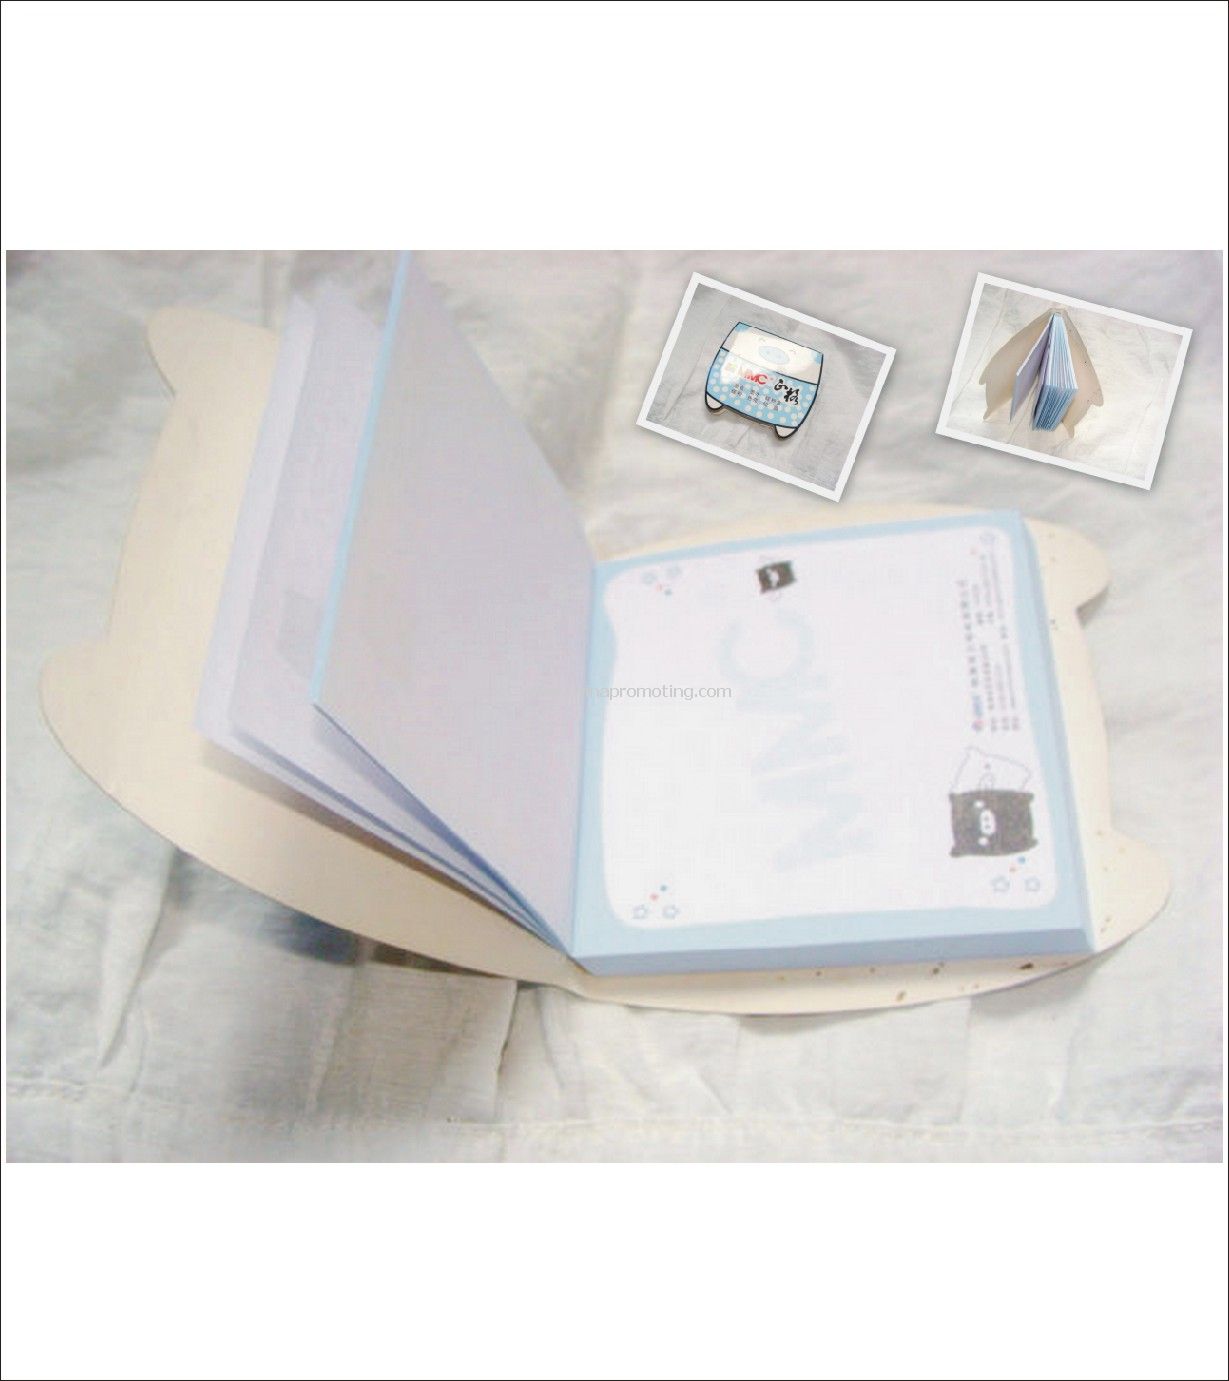 cartoon shape note pad with water mark printing